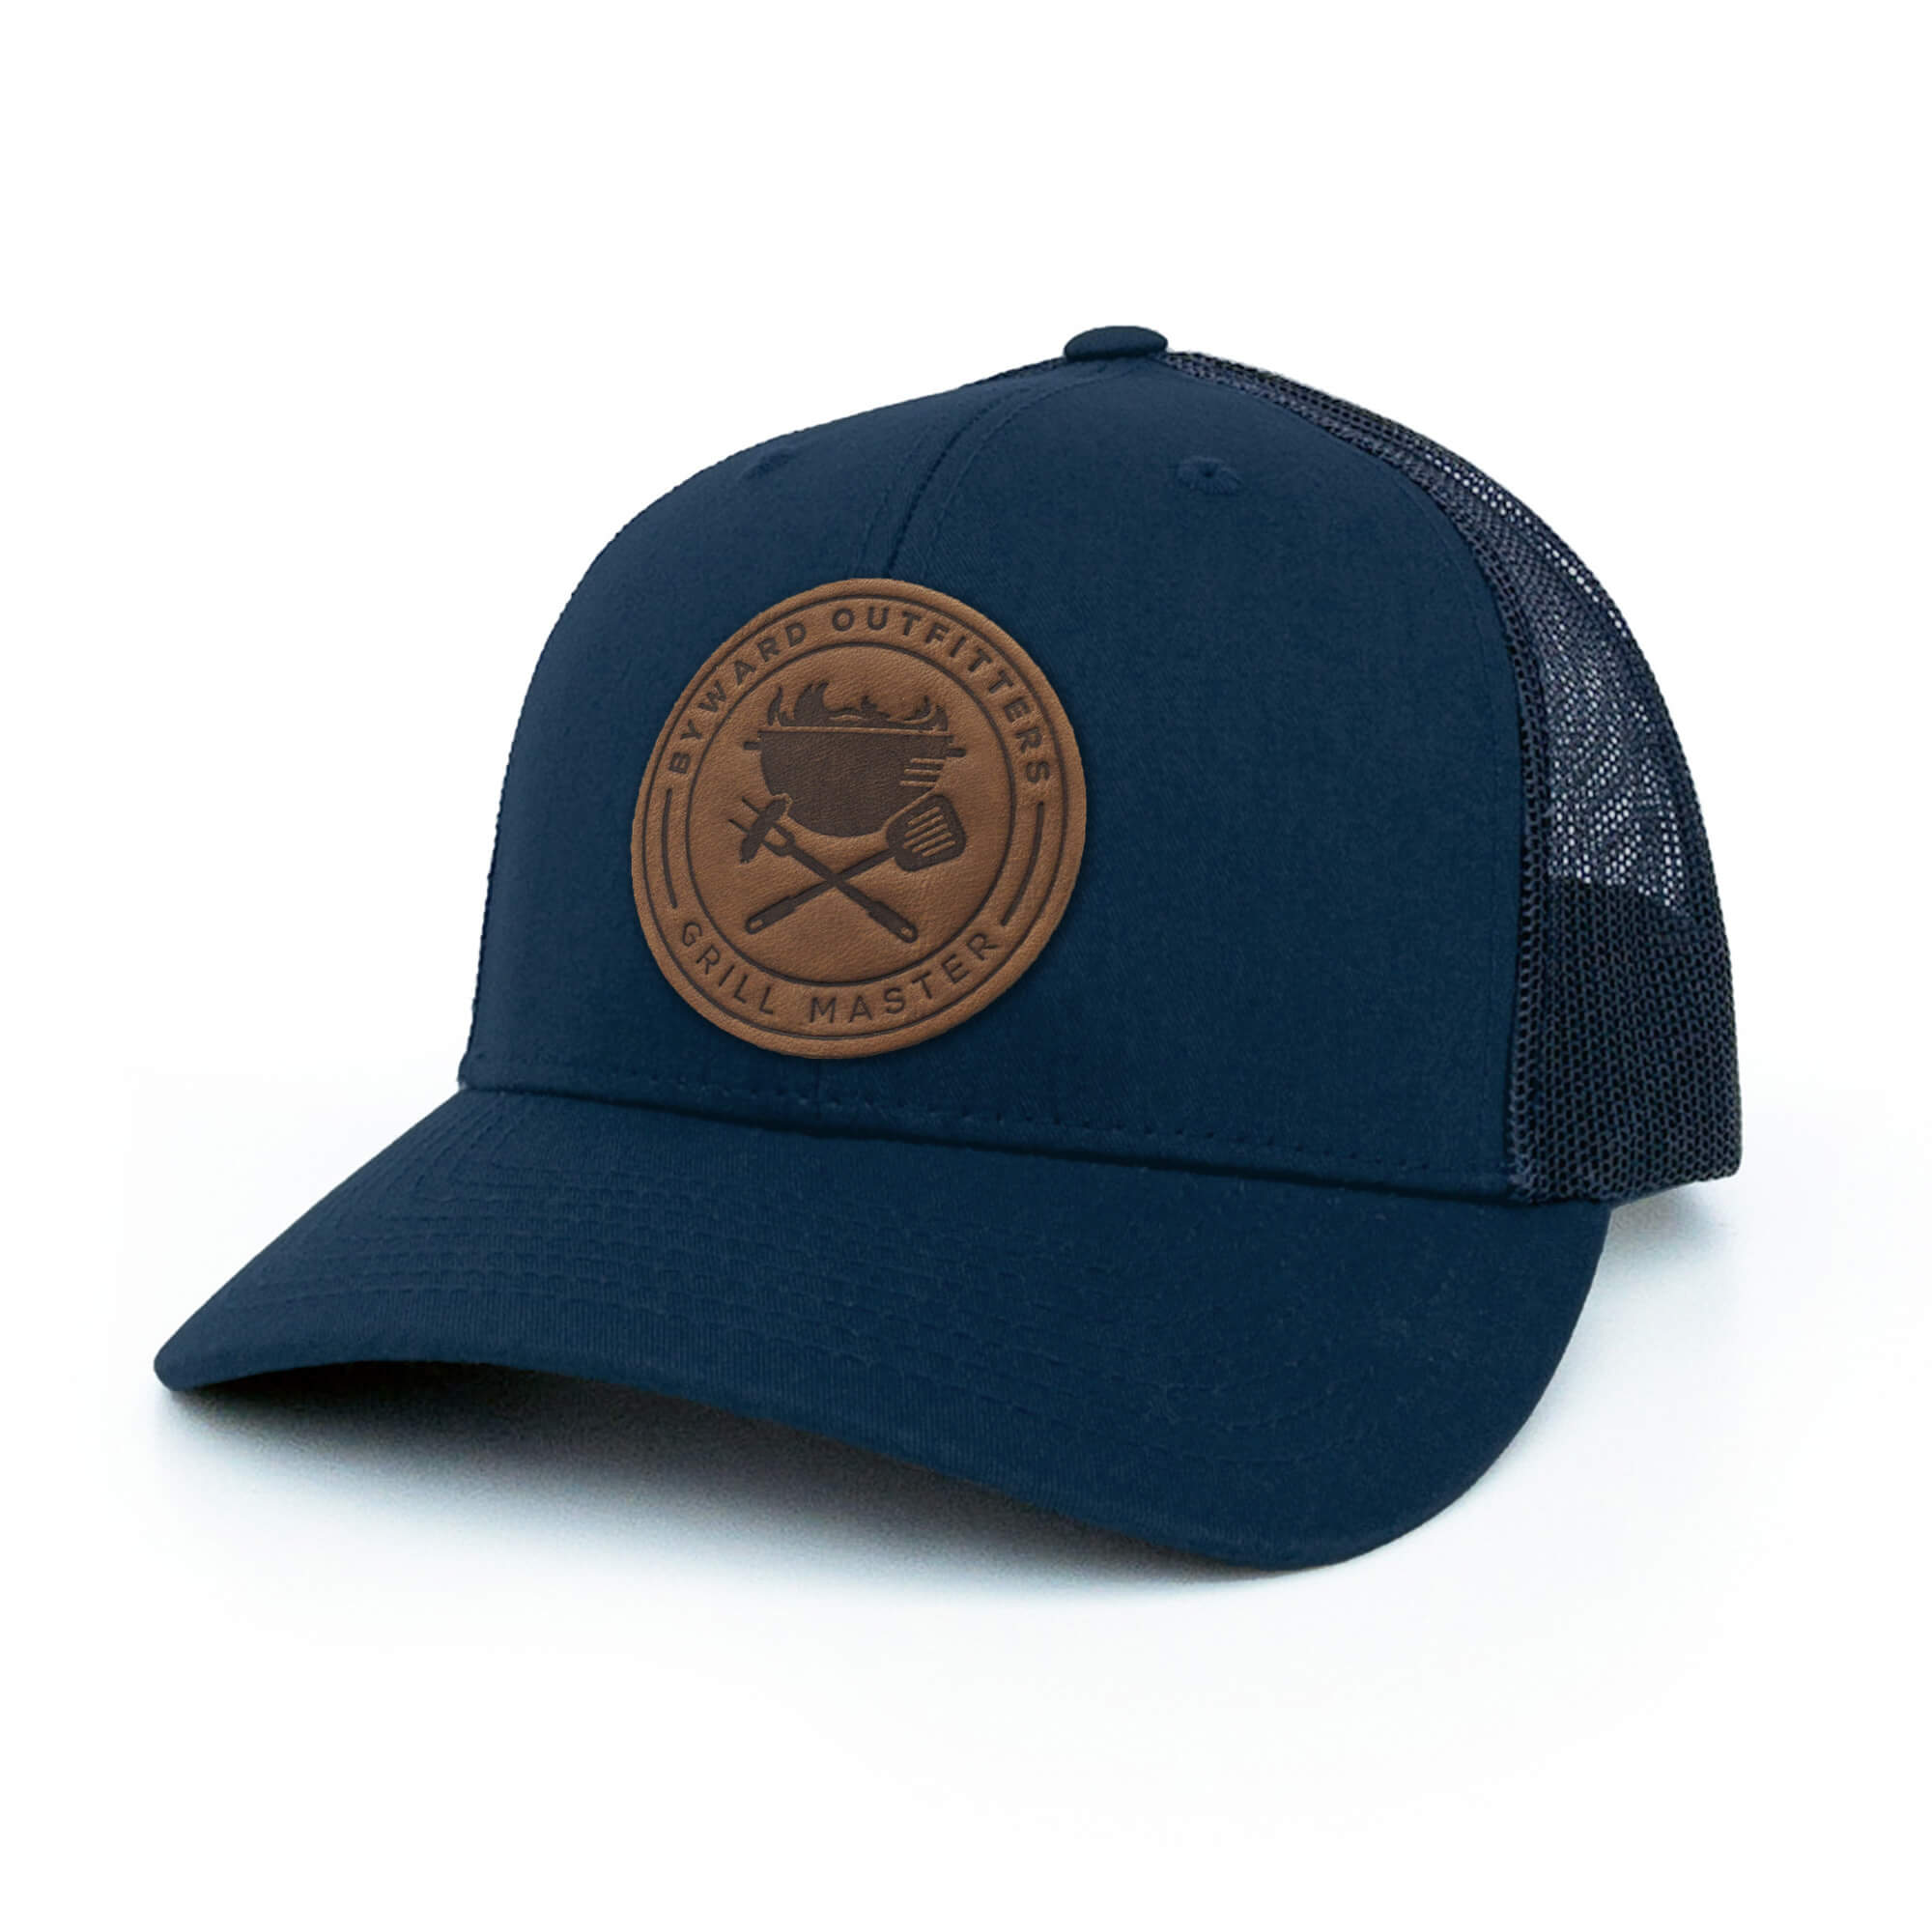 Navy trucker hat with full-grain leather patch of Grill Master | BLACK-006-002, CHARC-006-002, NAVY-006-002, HGREY-006-002, MOSS-006-002, BROWN-006-002